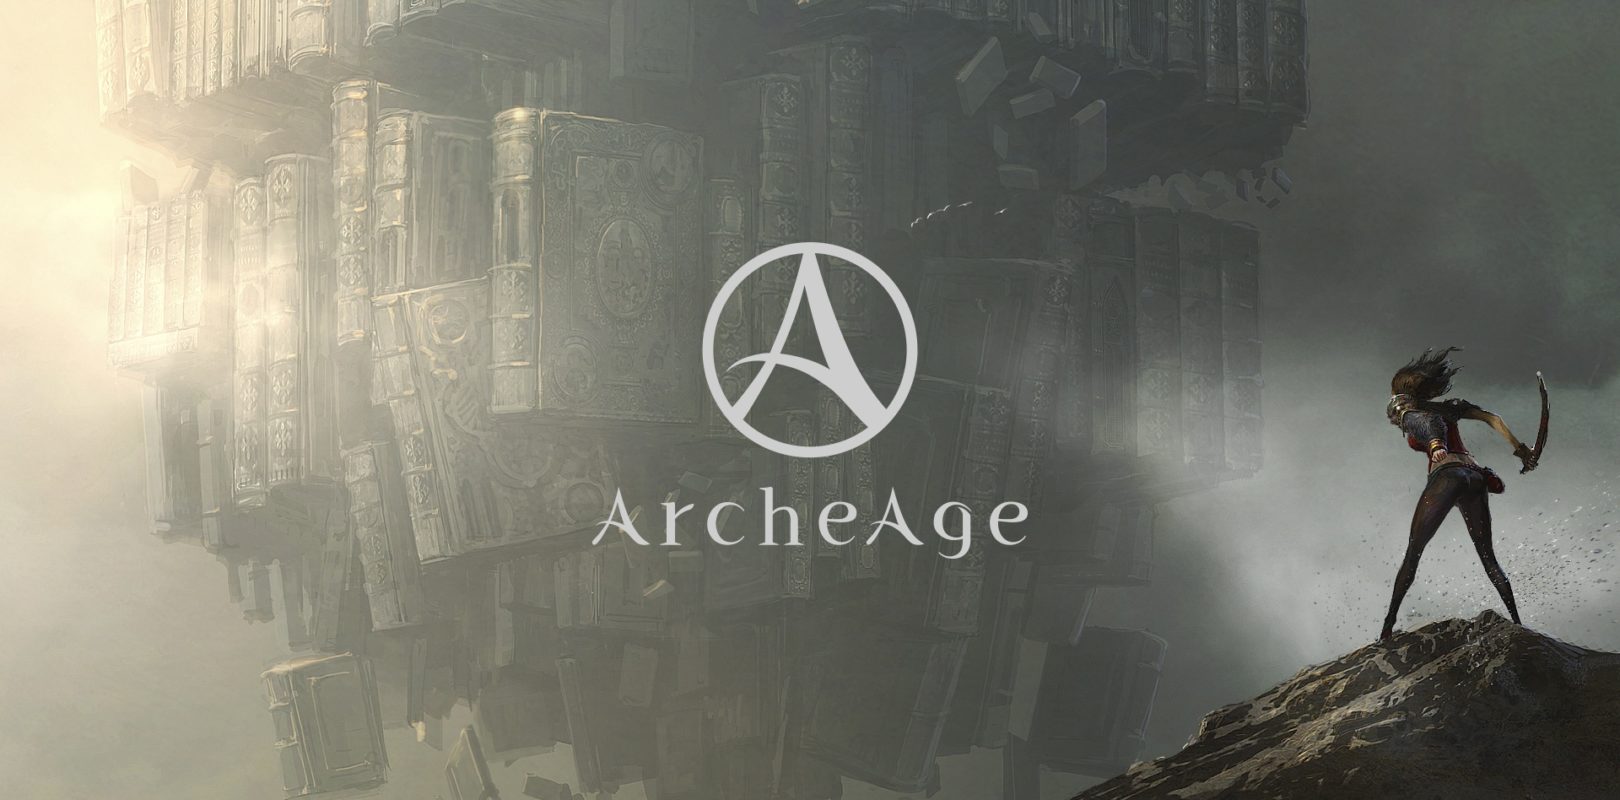 download free kakao games archeage unchained